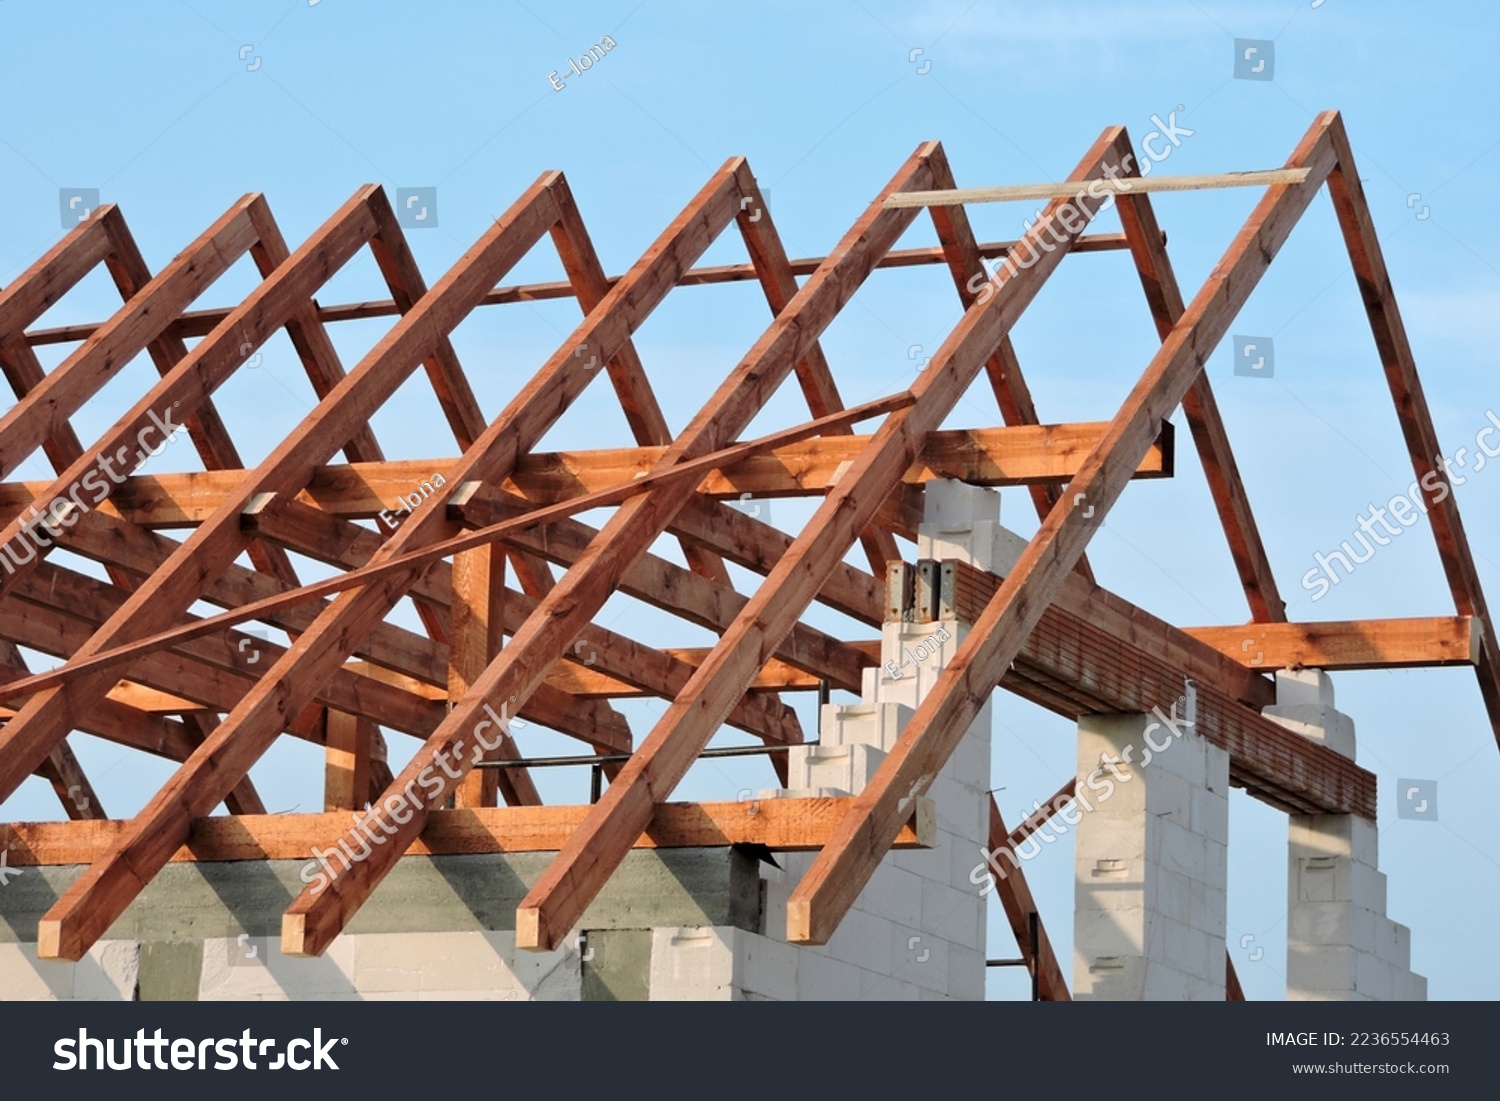 A timber roof truss, walls made of autoclaved aerated concrete blocks, a reinforced concrete beam and columns, a rough window opening, reinforced brick lintels, blue sky in the background #2236554463